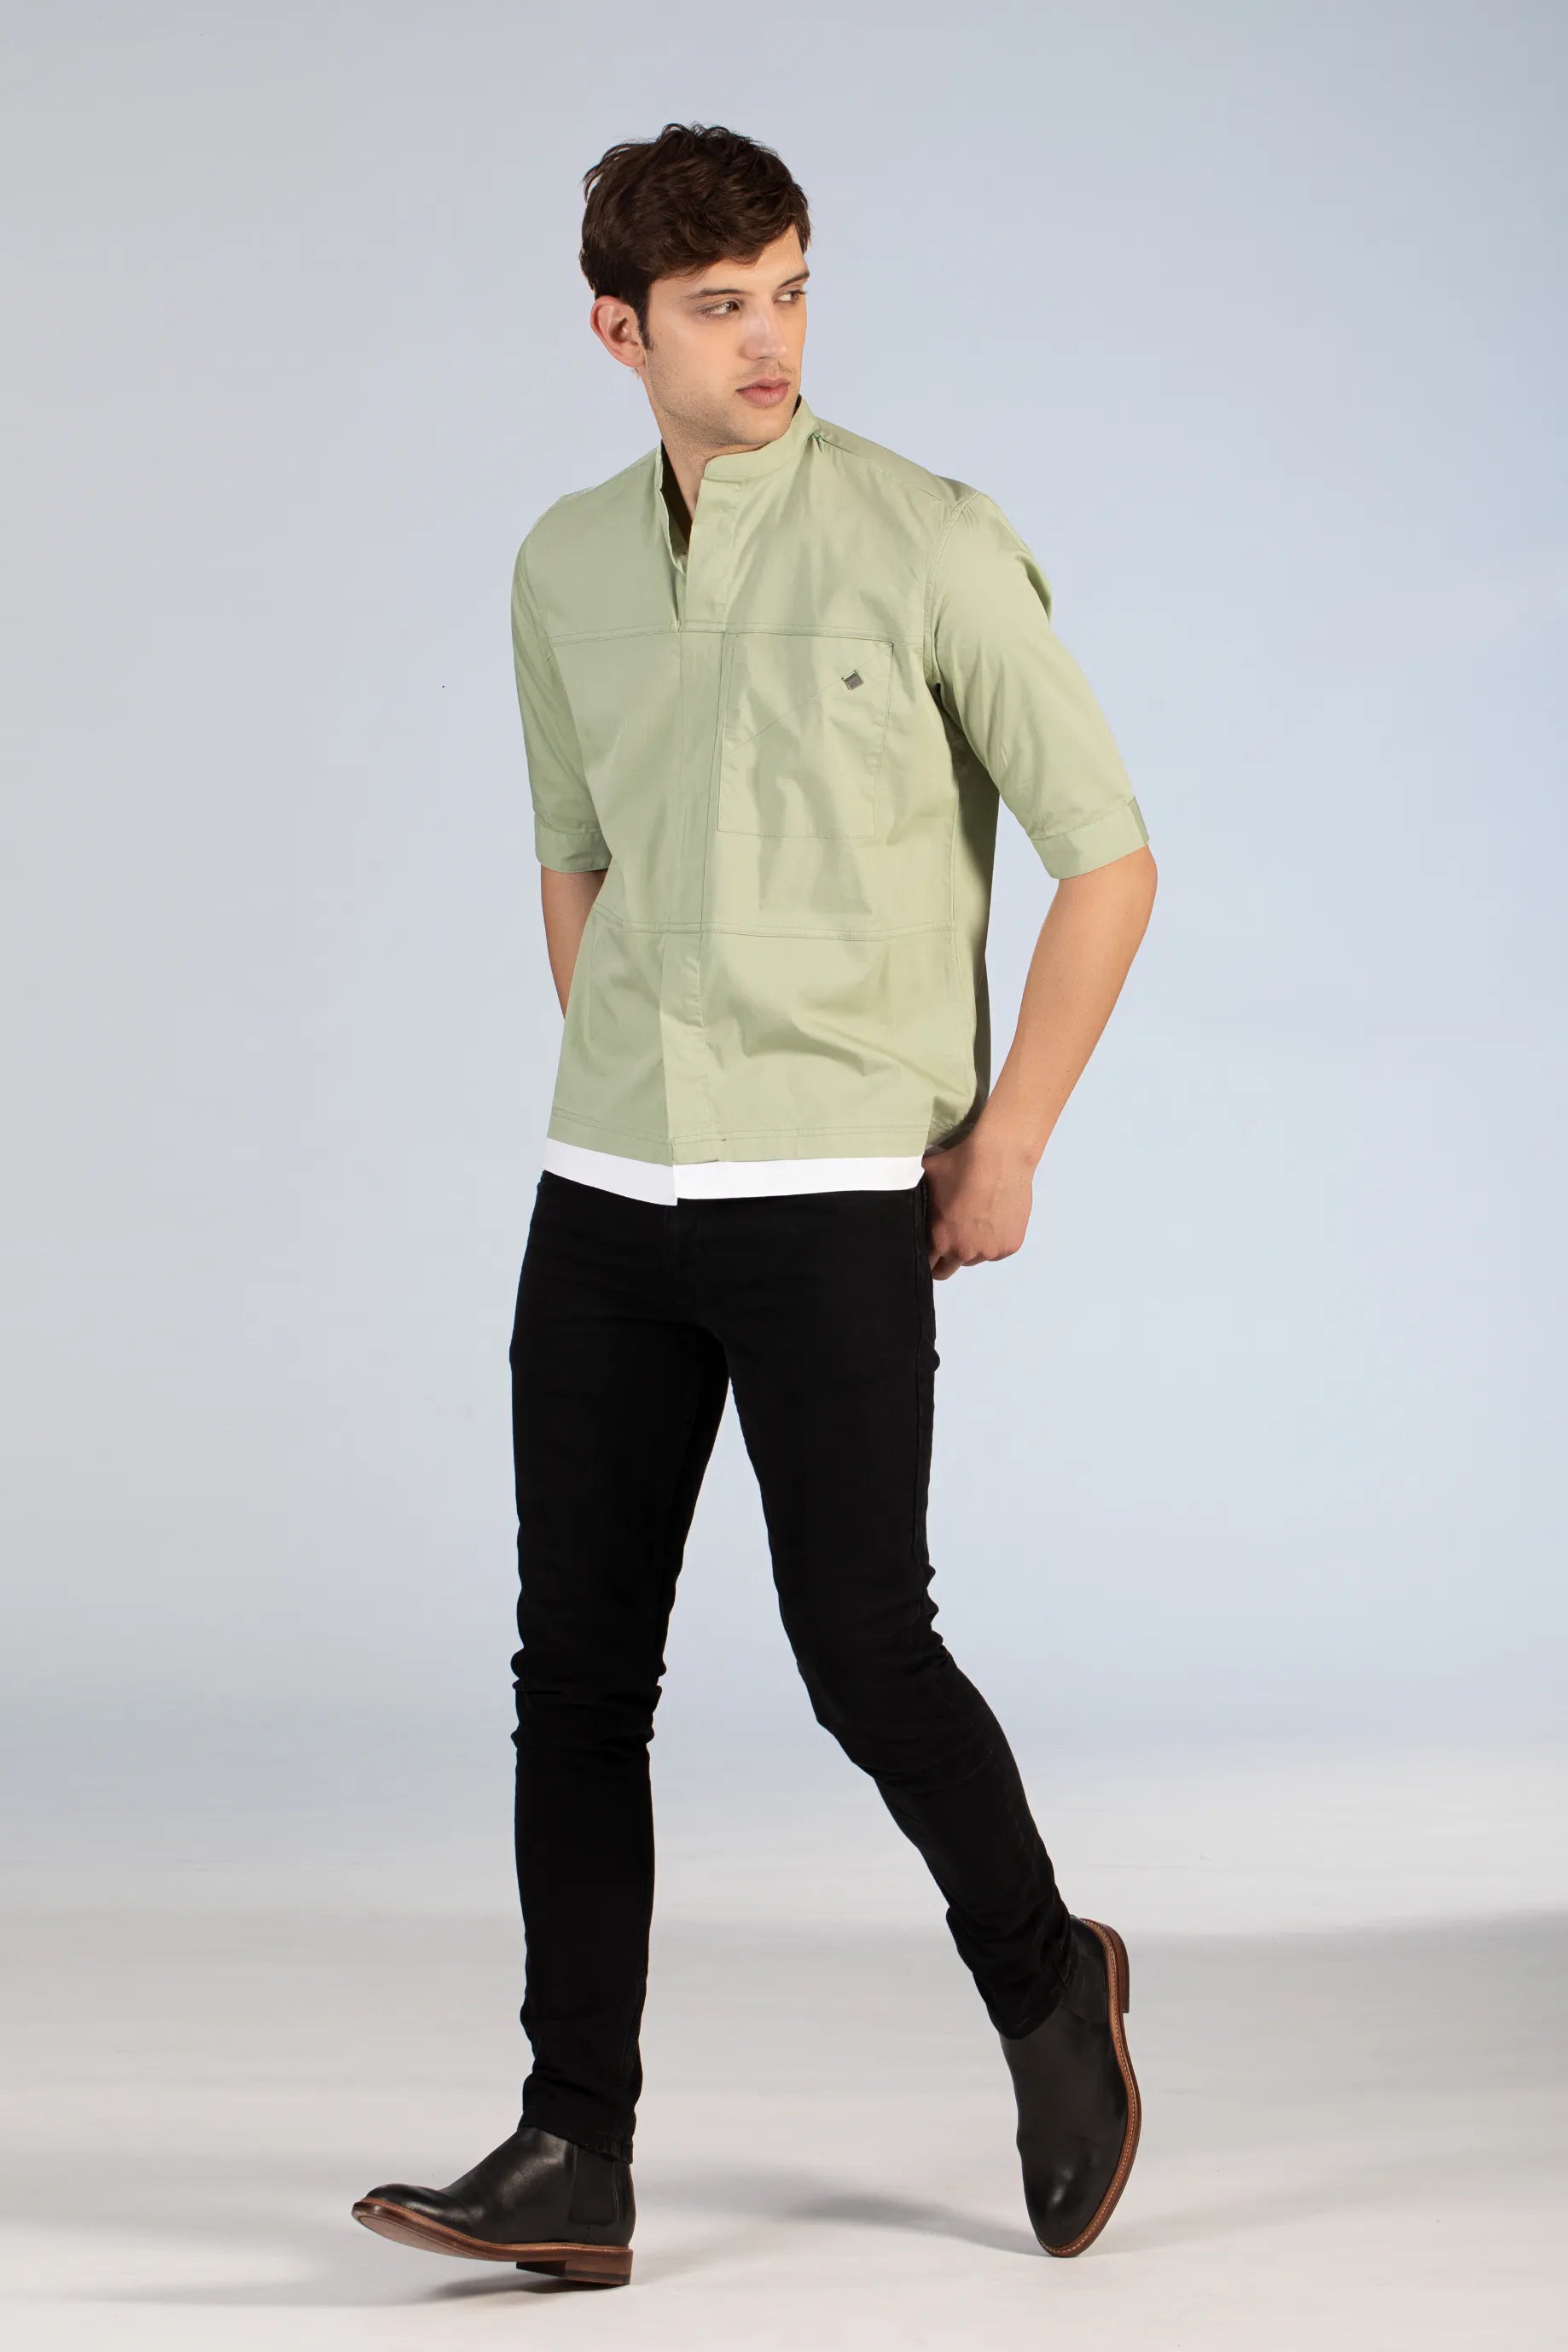 Buy Chinese Collar Five Sleeve Shirt Online.